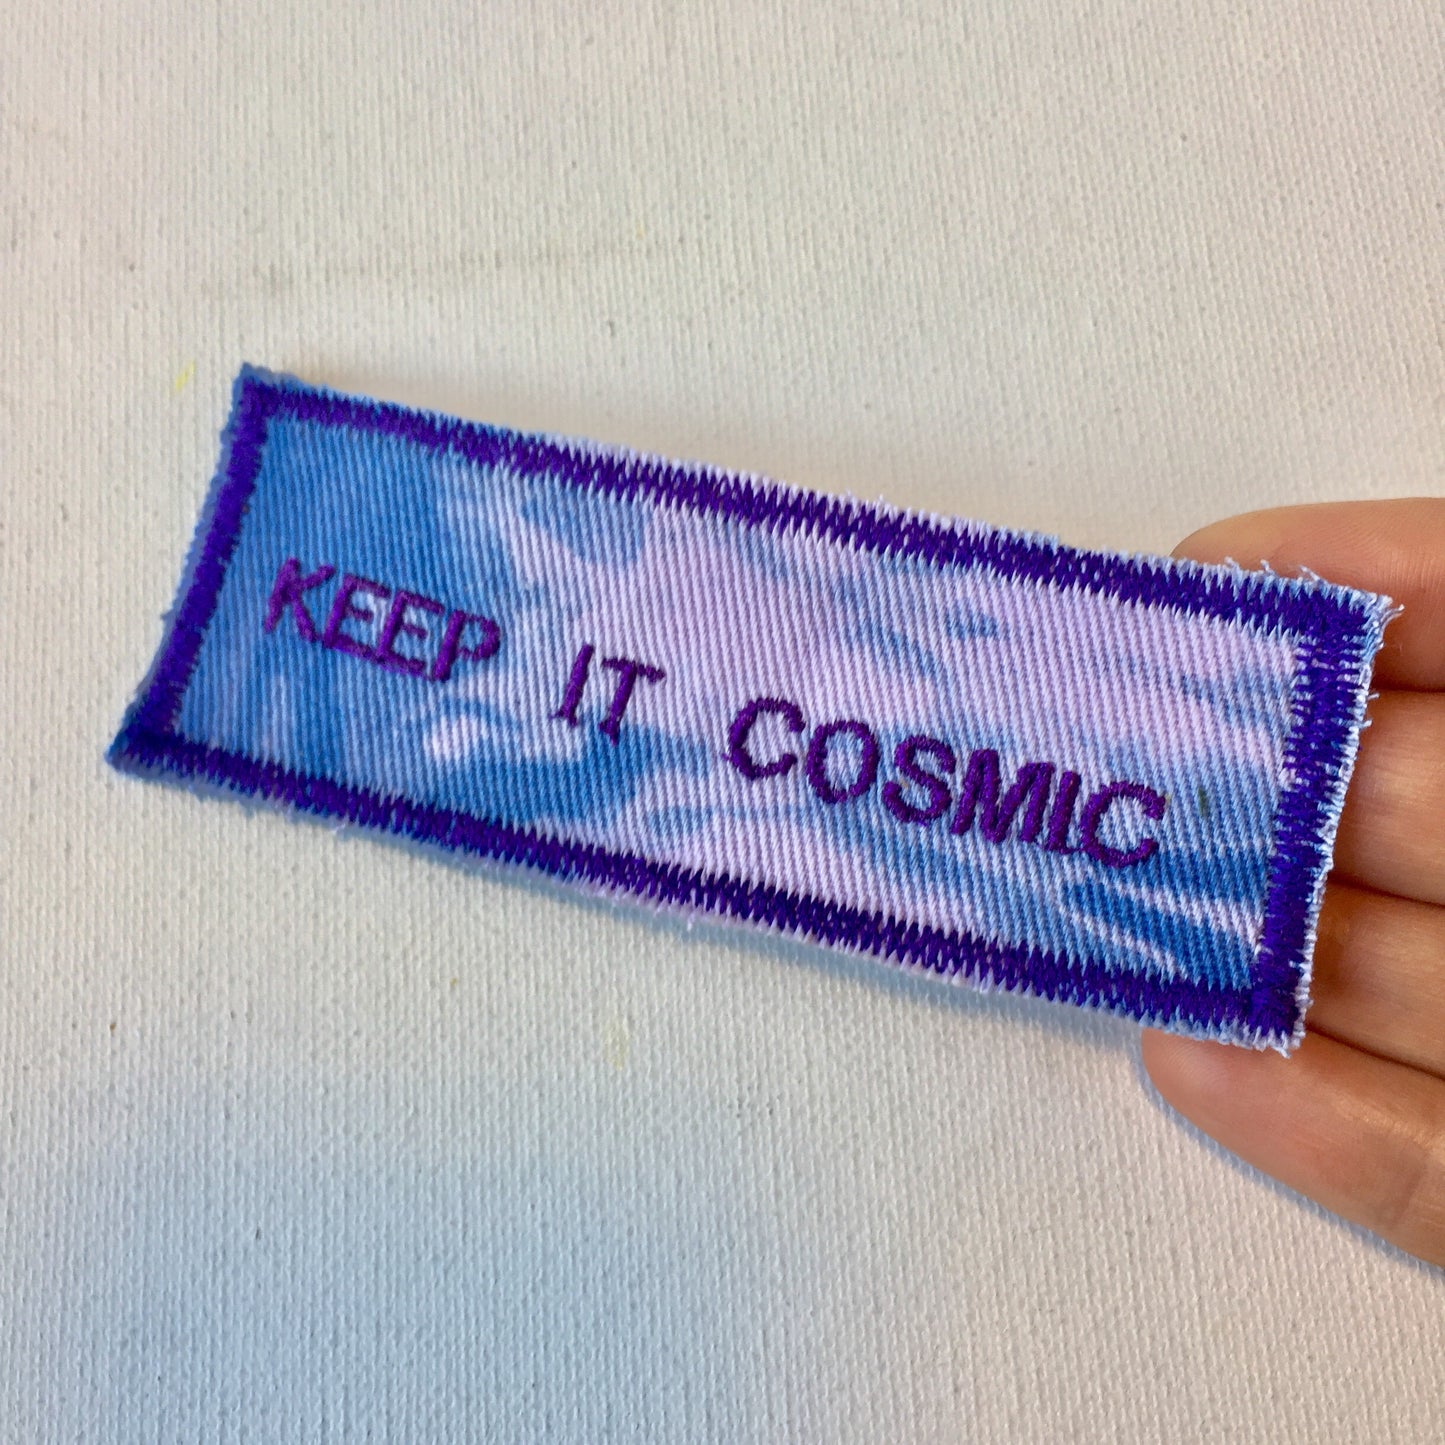 Keep it cosmic! Handmade Embroidered Canvas Patch.